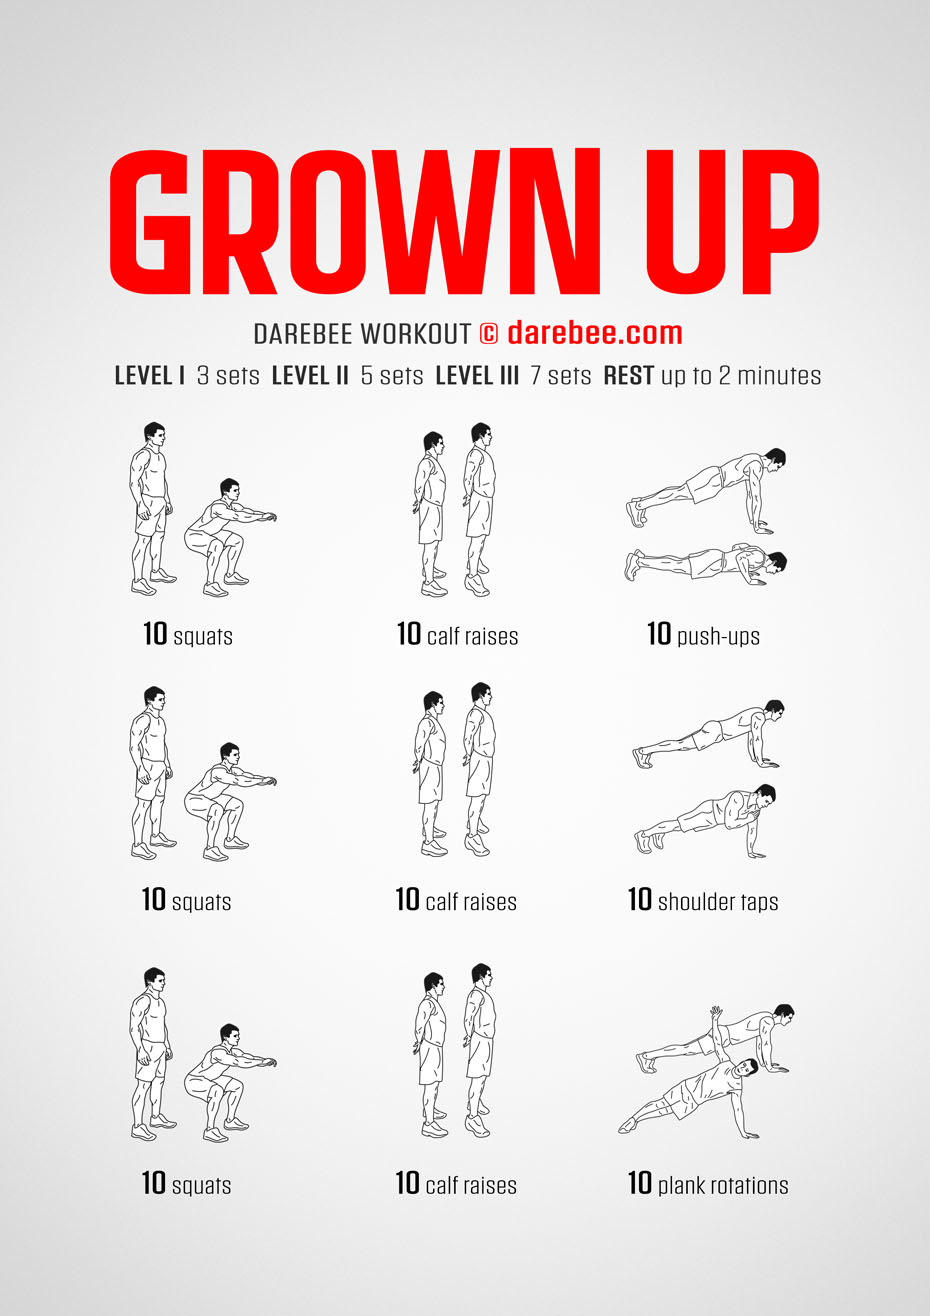 Grown Up is a full-body home-fitness, strength and tone workout designed to help you maintain your fitness level in-between more challenging workouts.